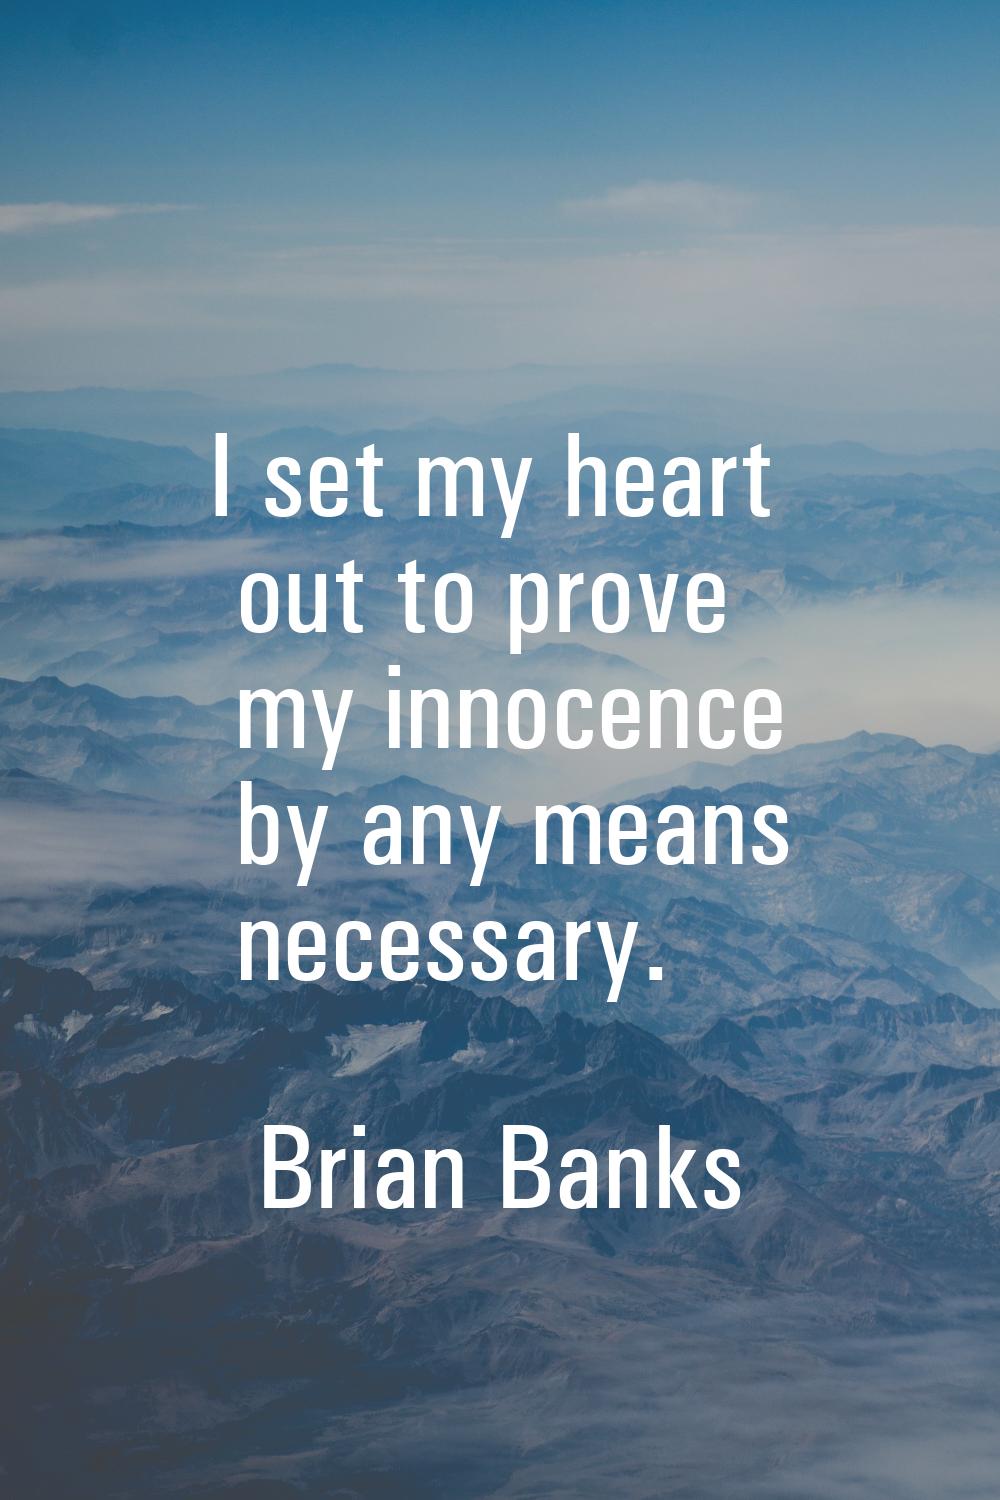 I set my heart out to prove my innocence by any means necessary.